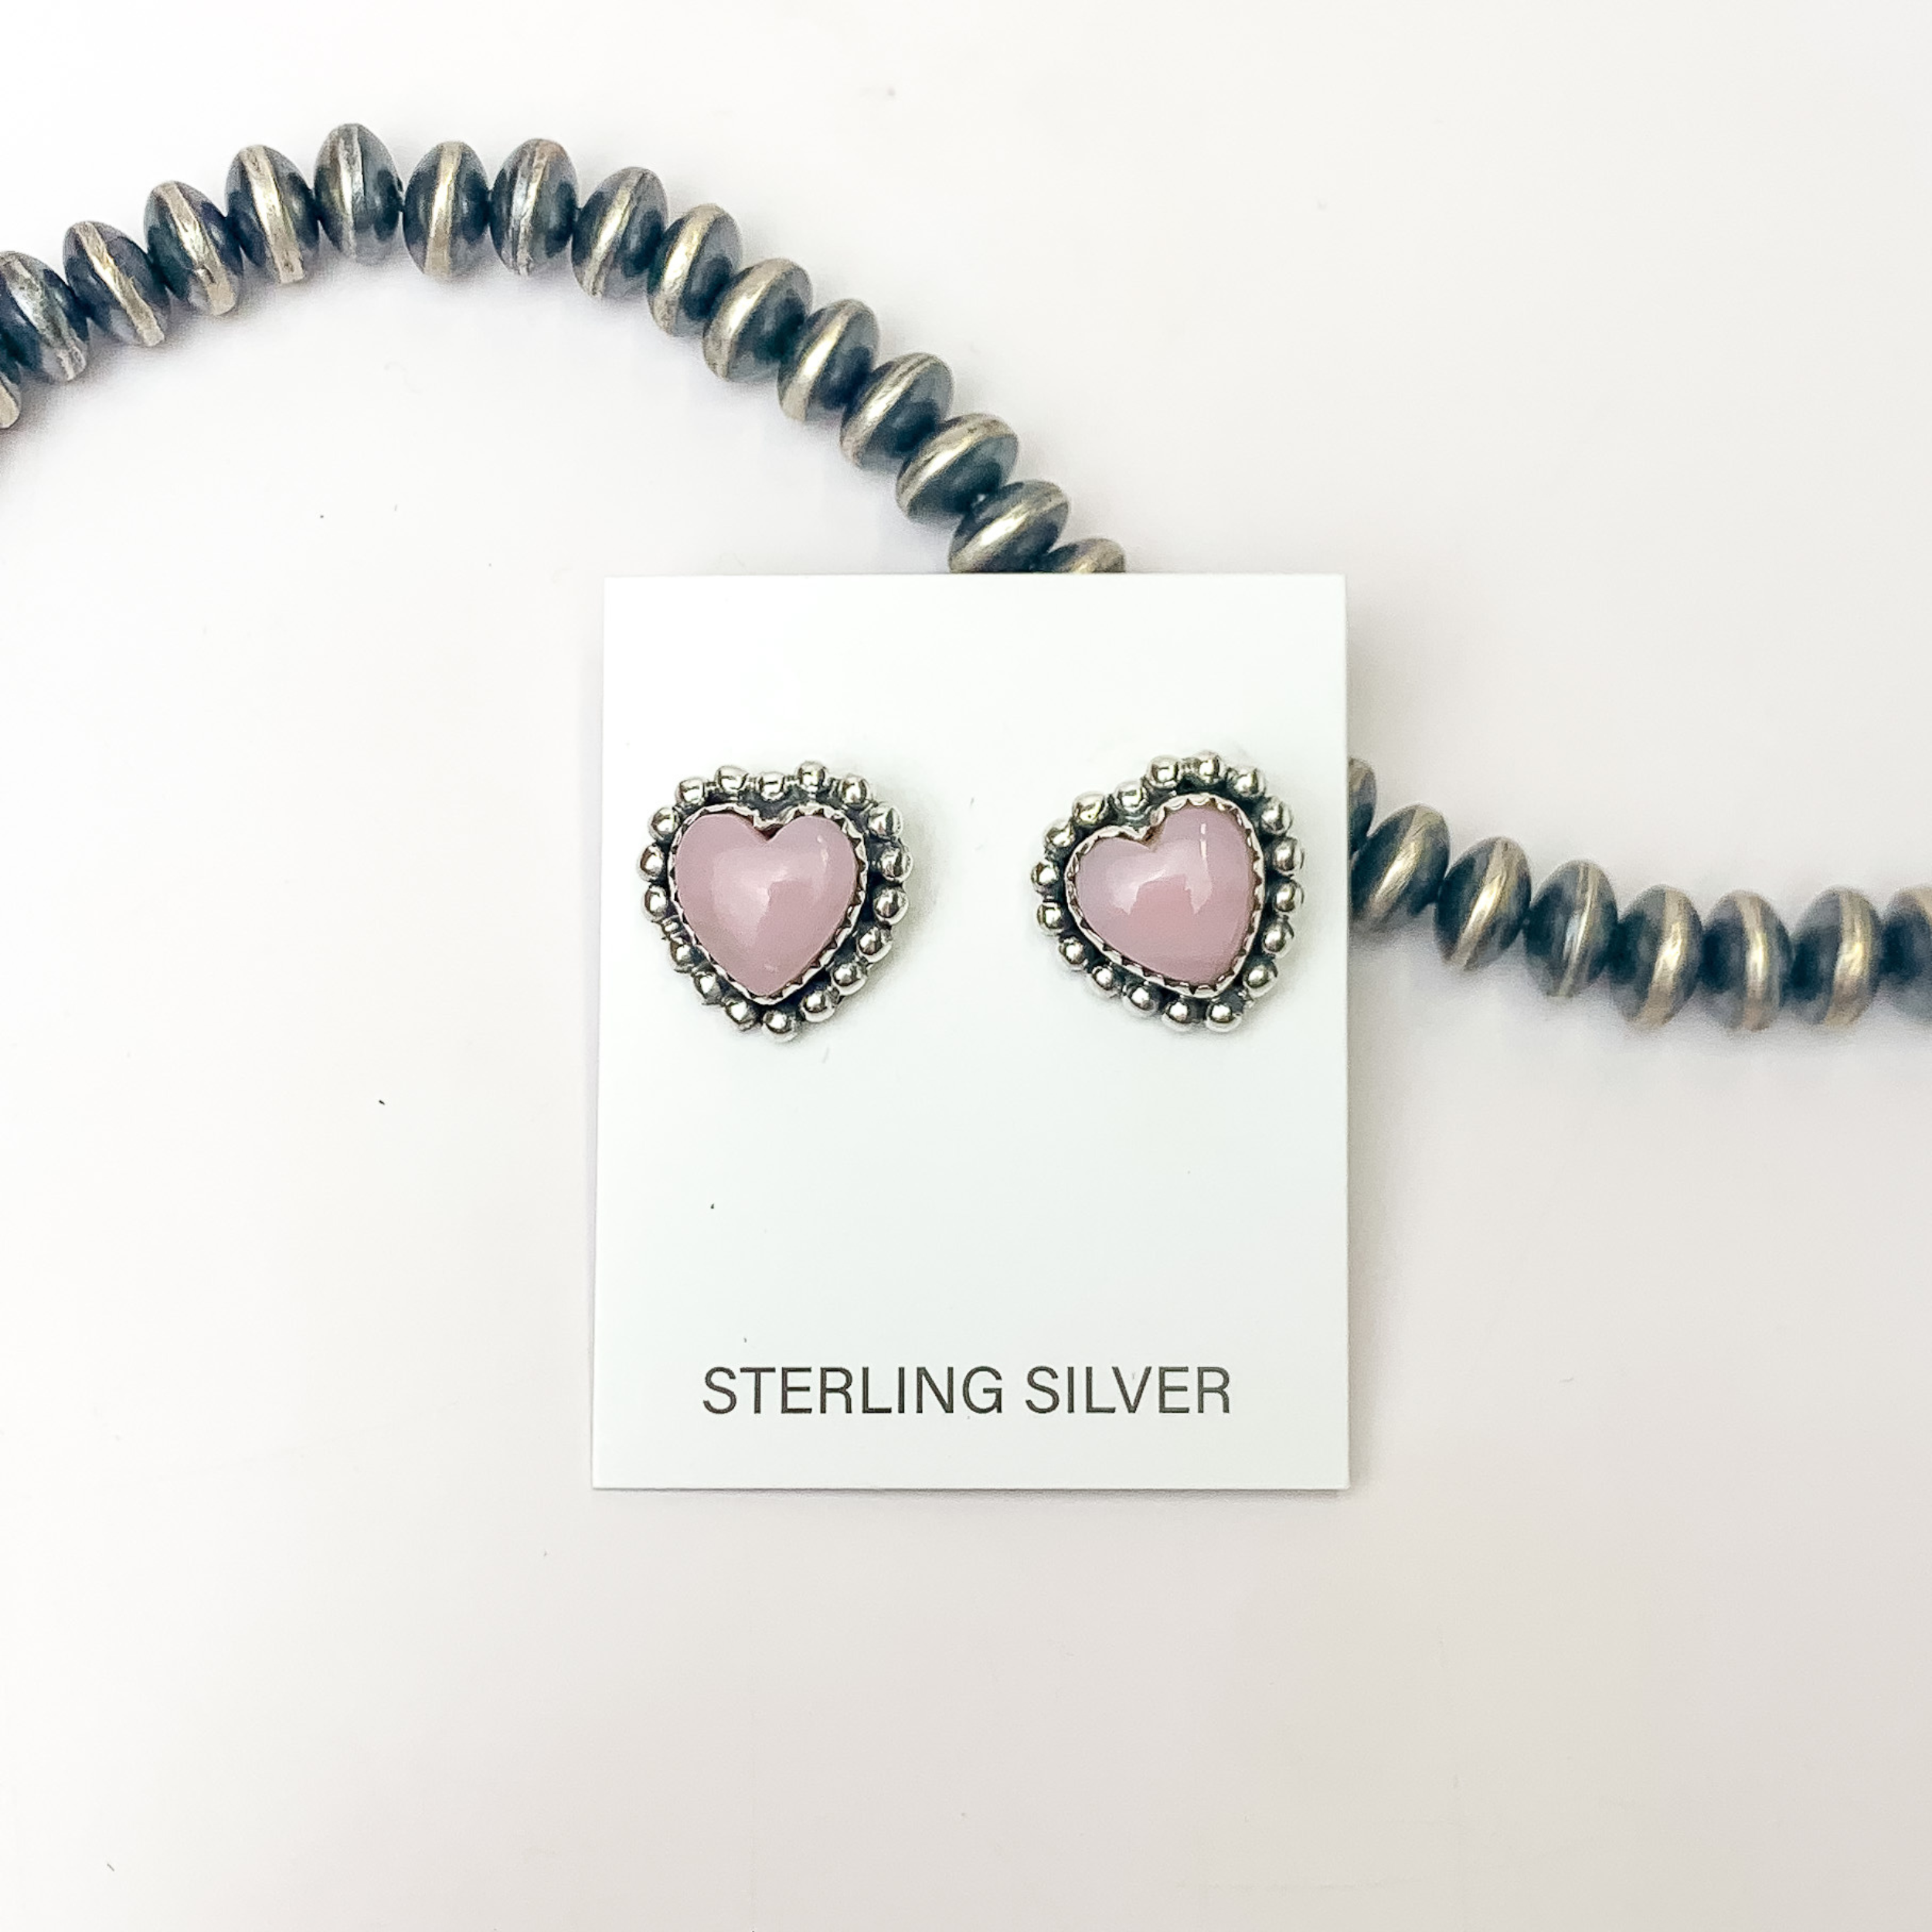 Hada Collection | Handmade Sterling Silver Heart Shaped Stud Earrings with Pink Conch Stones - Giddy Up Glamour Boutique